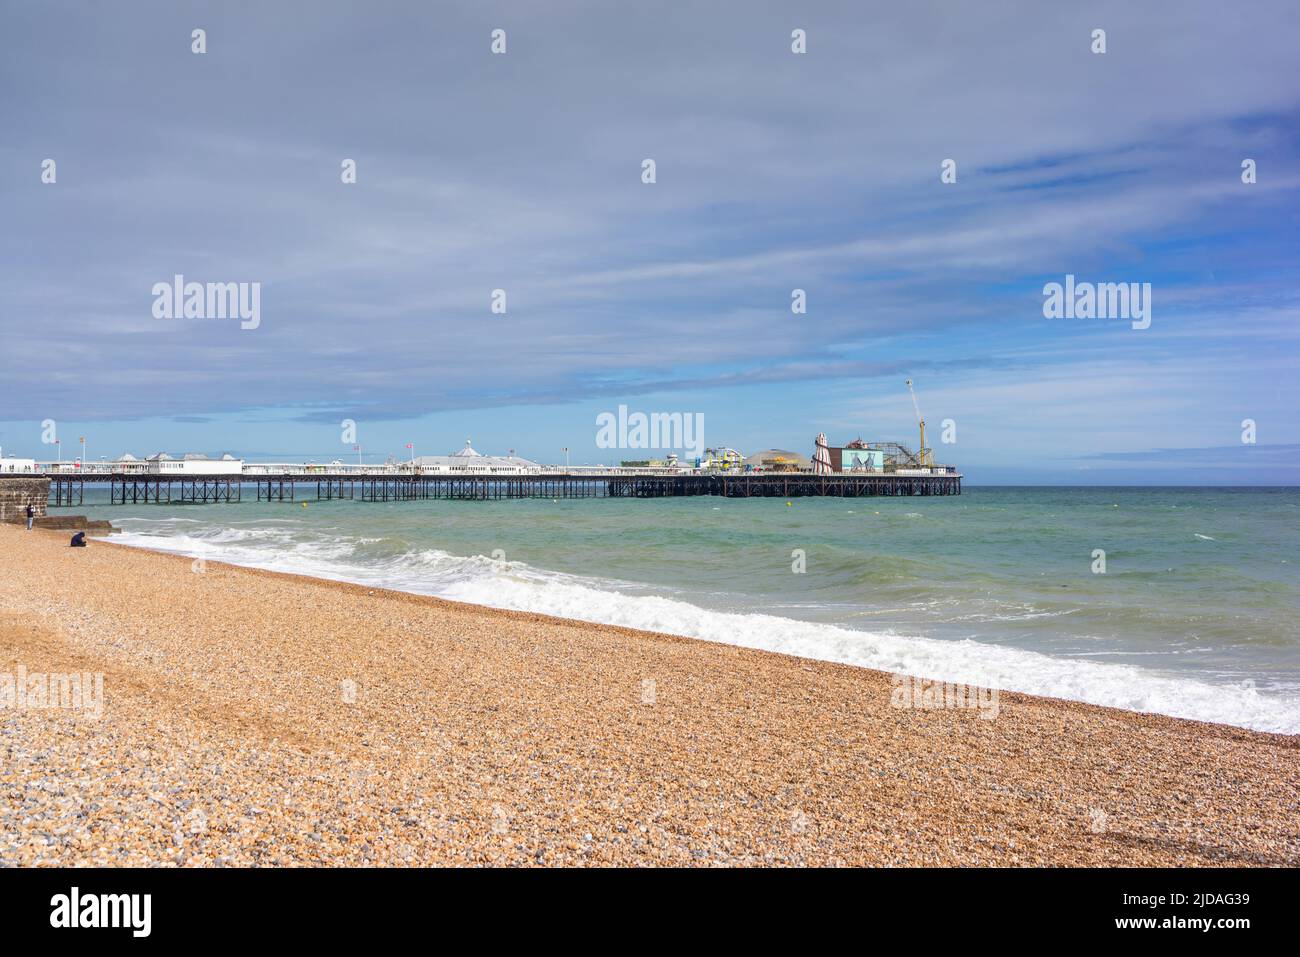 Brighton Palace Pier, Grade II* listed pleasure pier at the seafront in Brighton, famous landmark of Brighton, East Sussex, England, UK Stock Photo